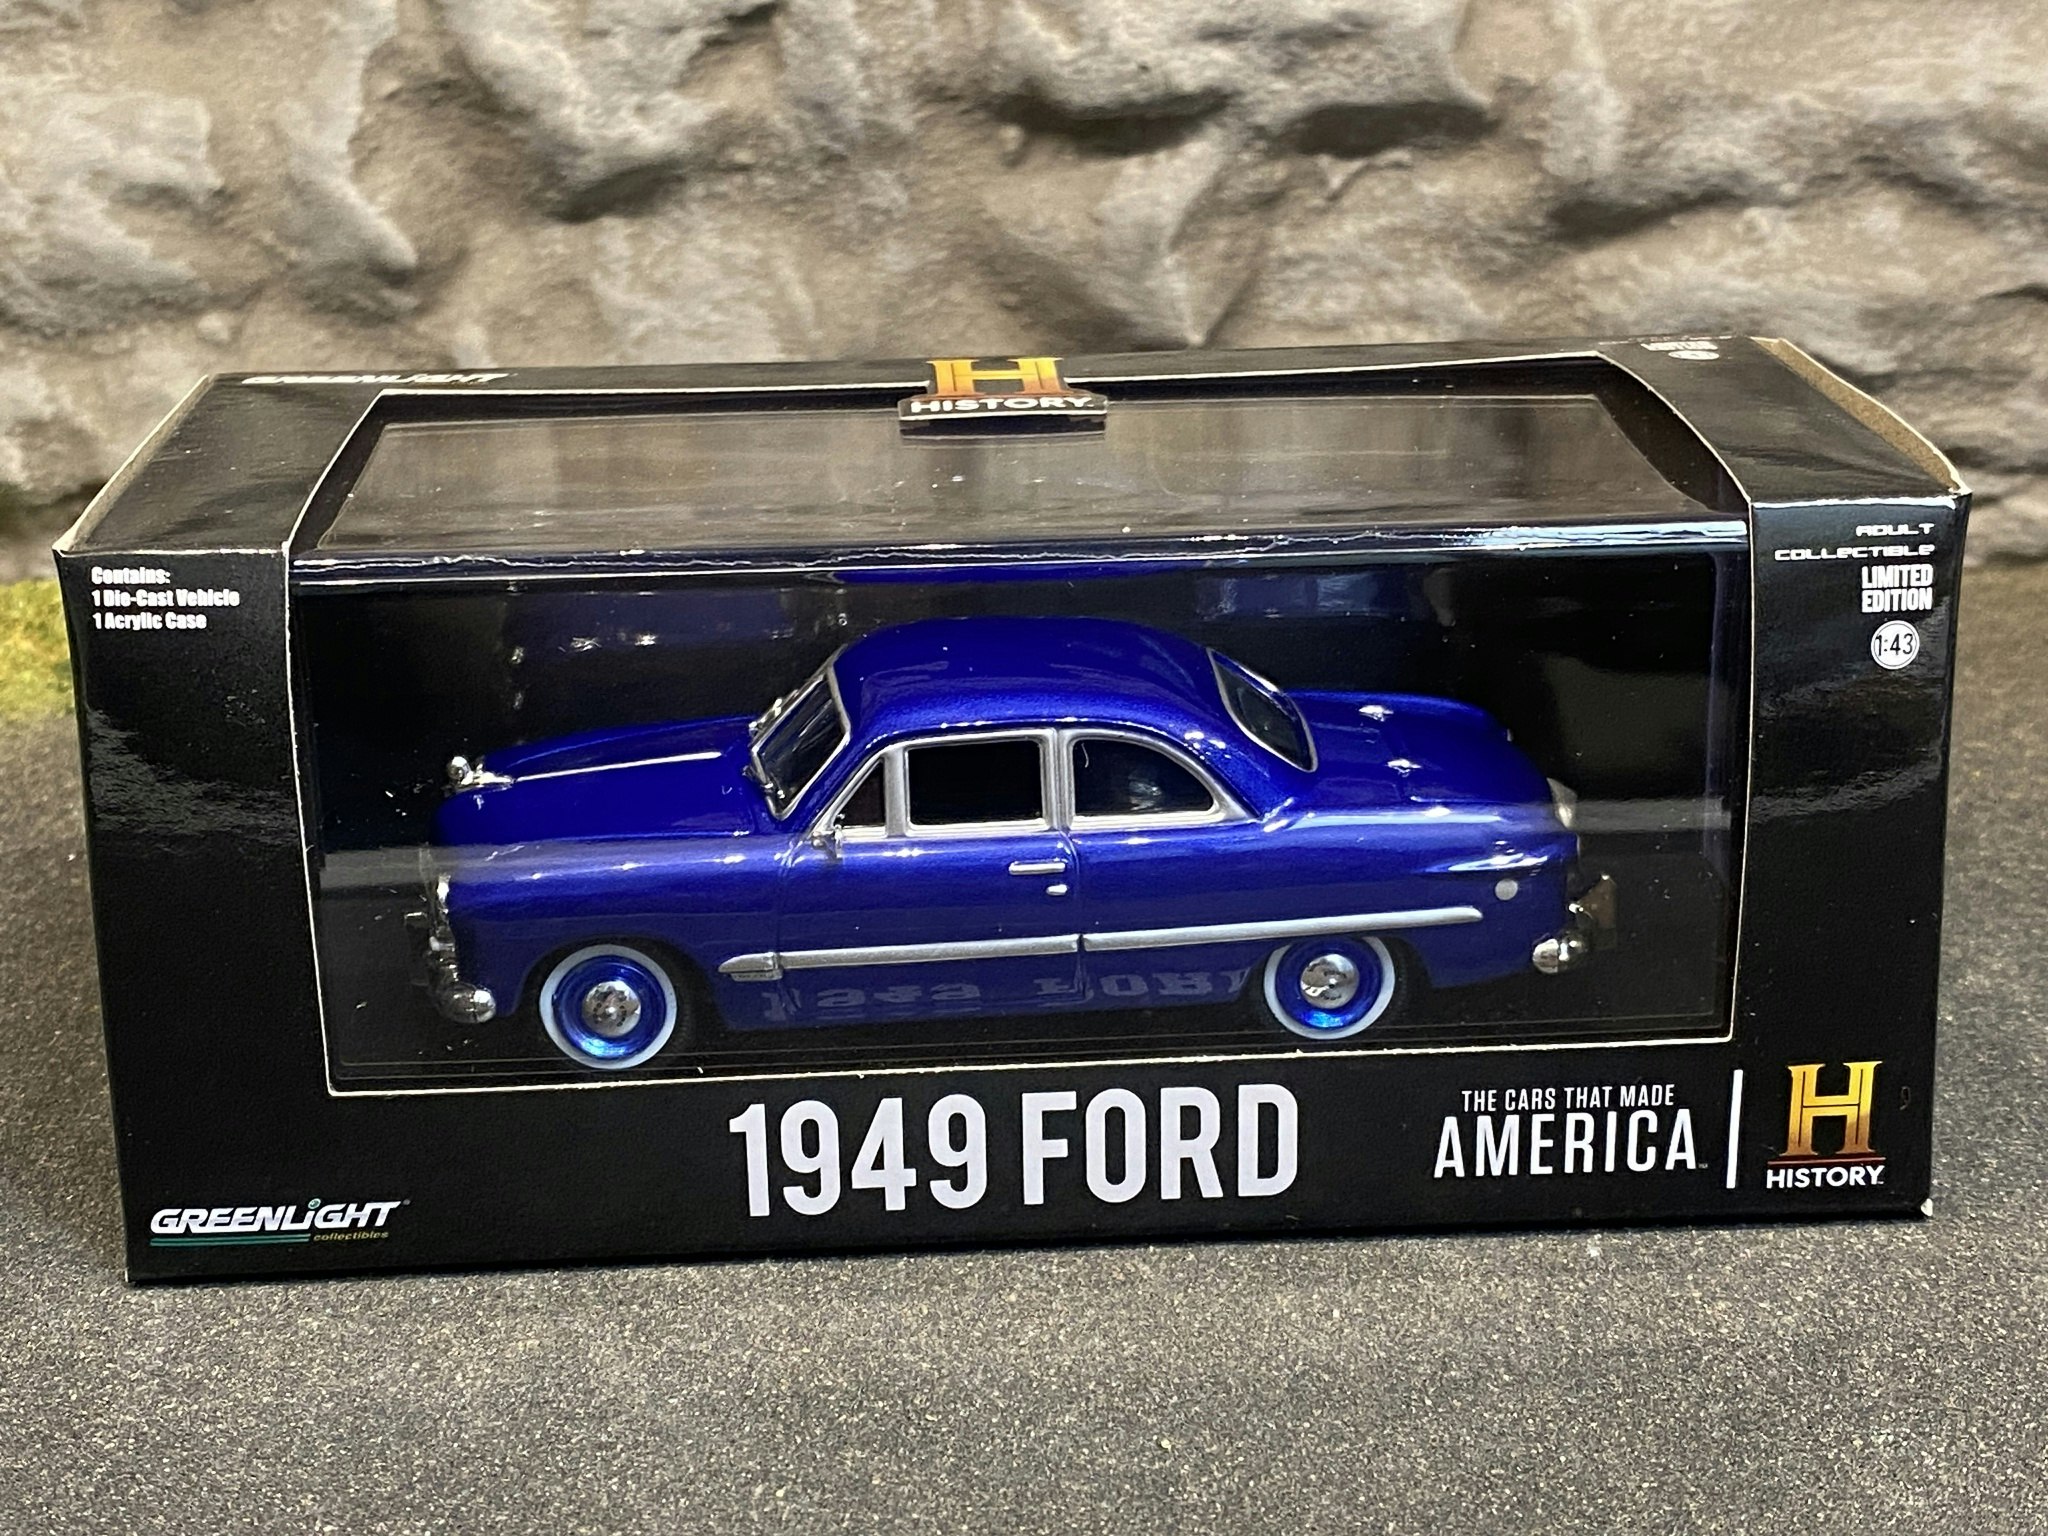 Skala 1/43 1949 Ford. The Cars that made America - History - Greenlight